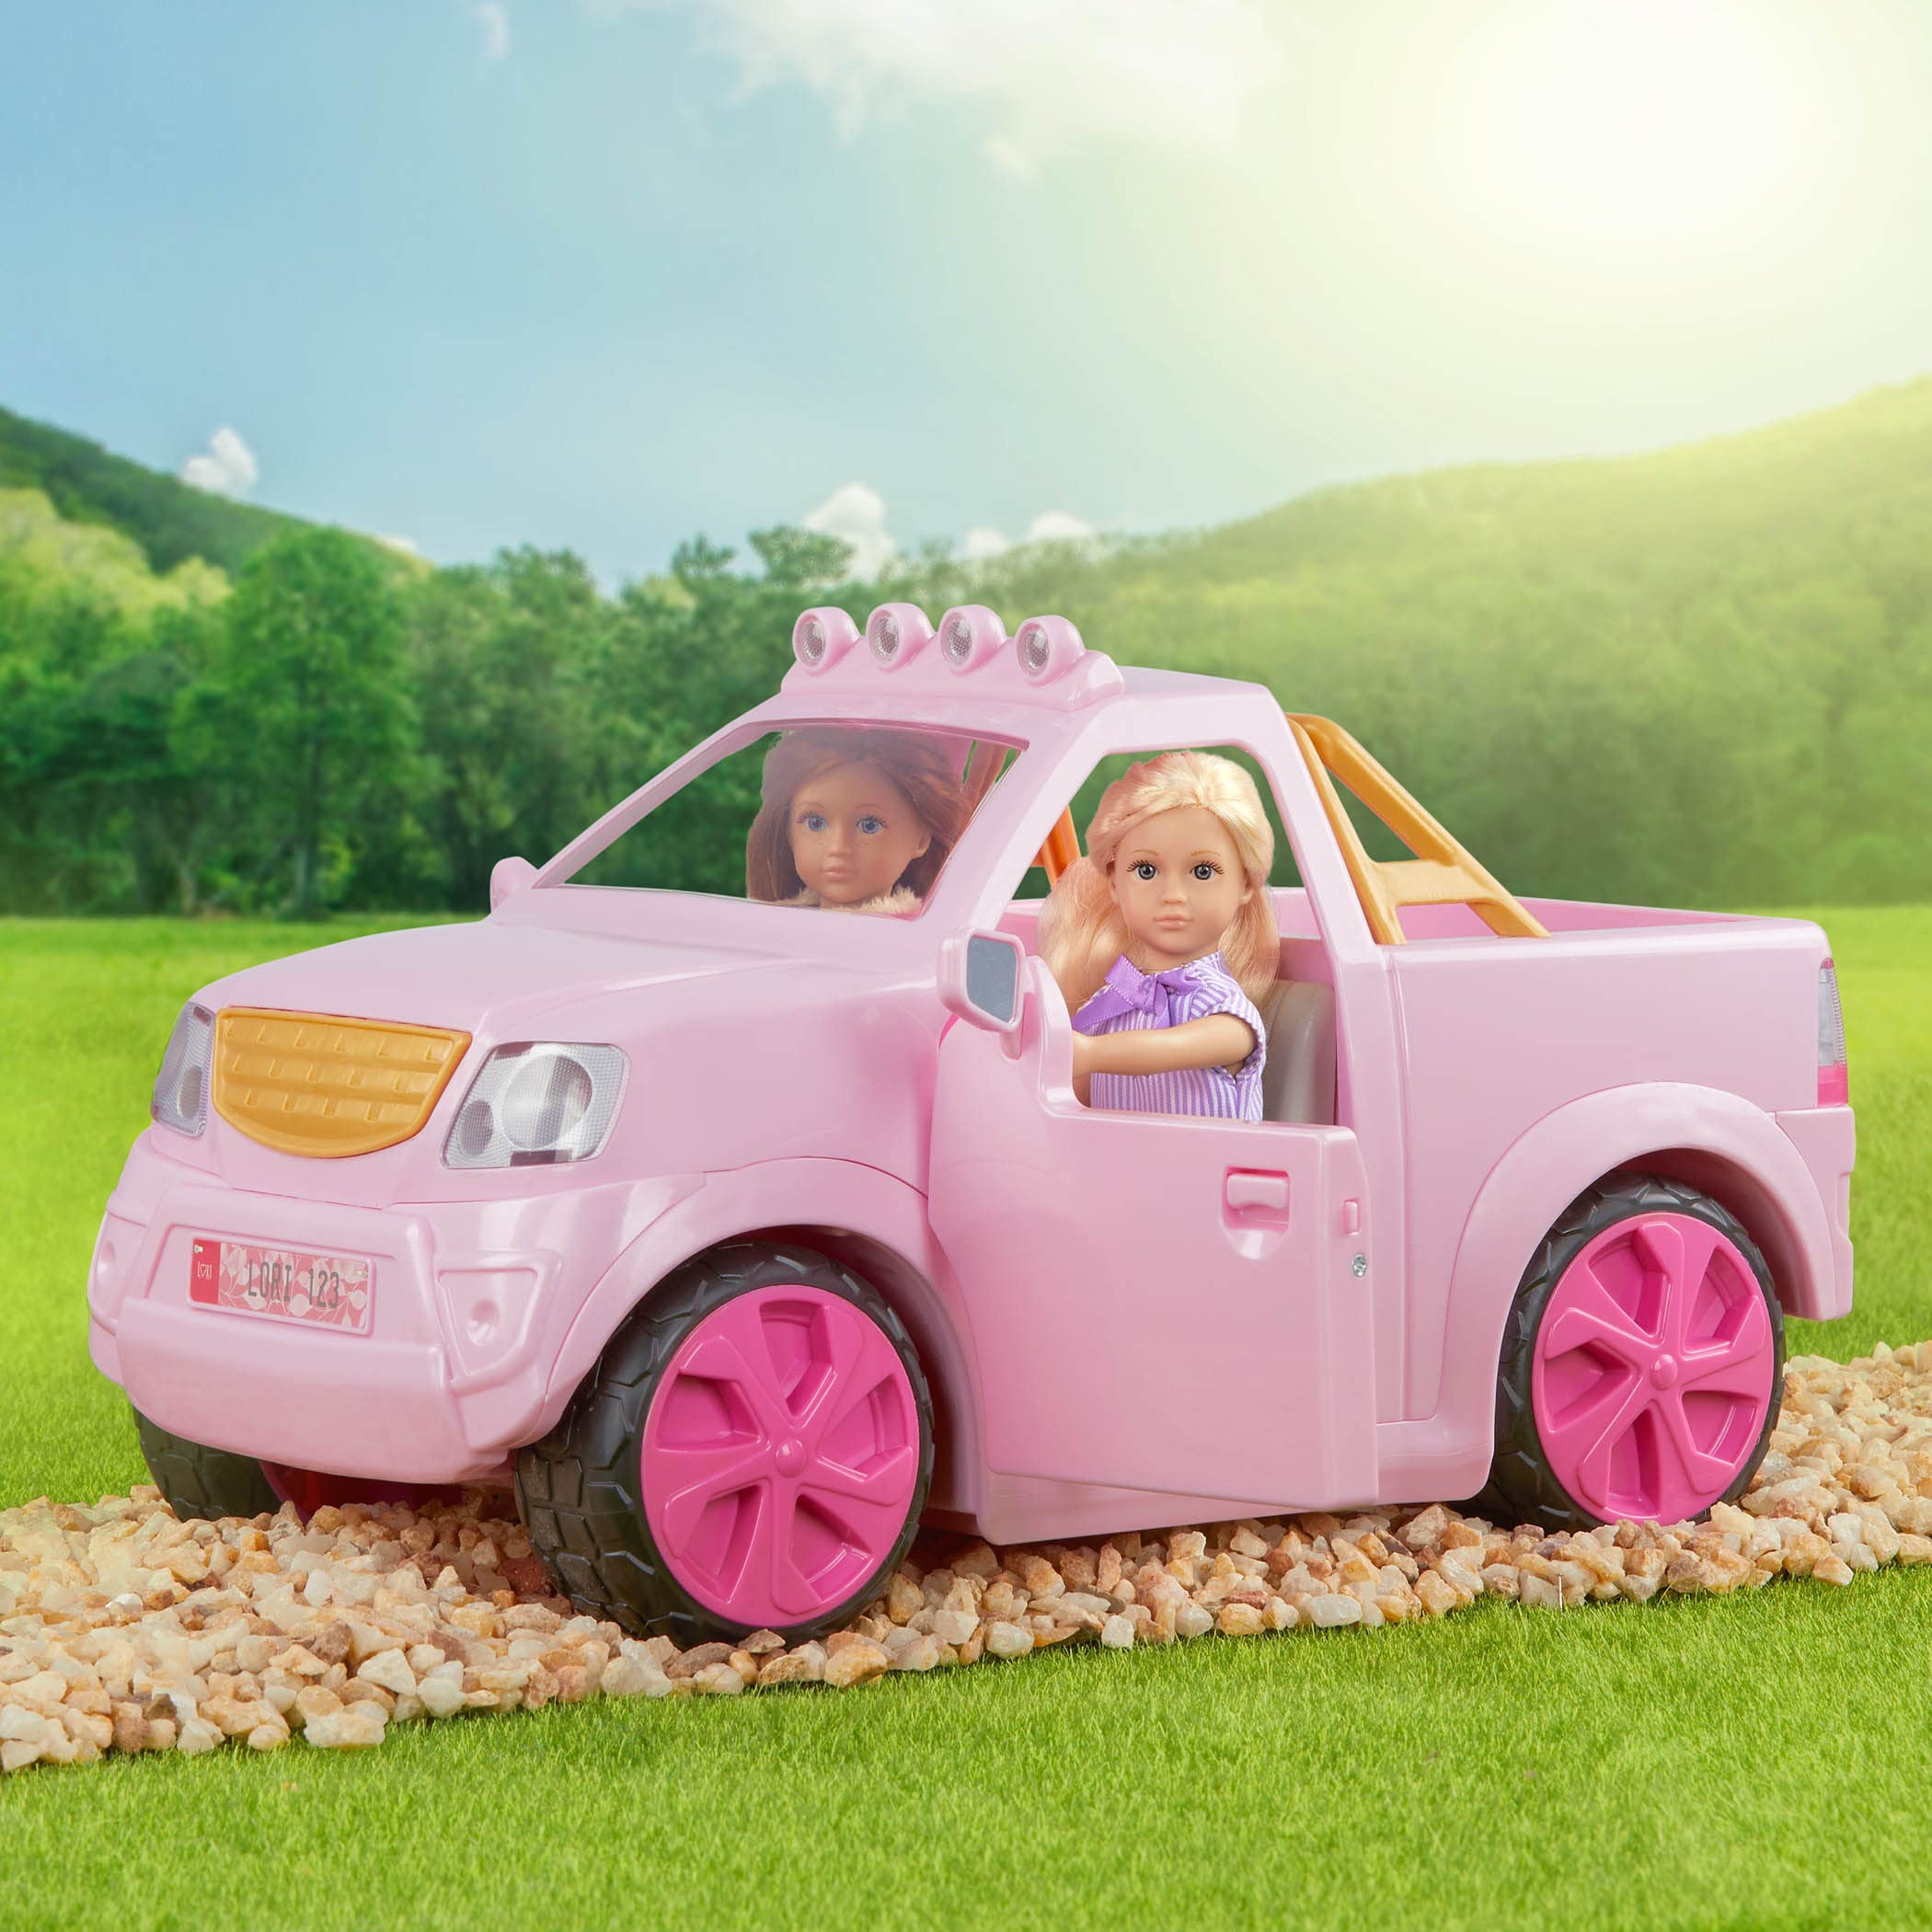 Lori Dolls – Ride & Shine Pickup Truck– Pick-Up Truck for Mini Dolls – Pink Car for 6-inch Dolls – Trailer Hitch & Openable Doors – Toy Vehicle for Kids – 3 Years + LO37113C1Z